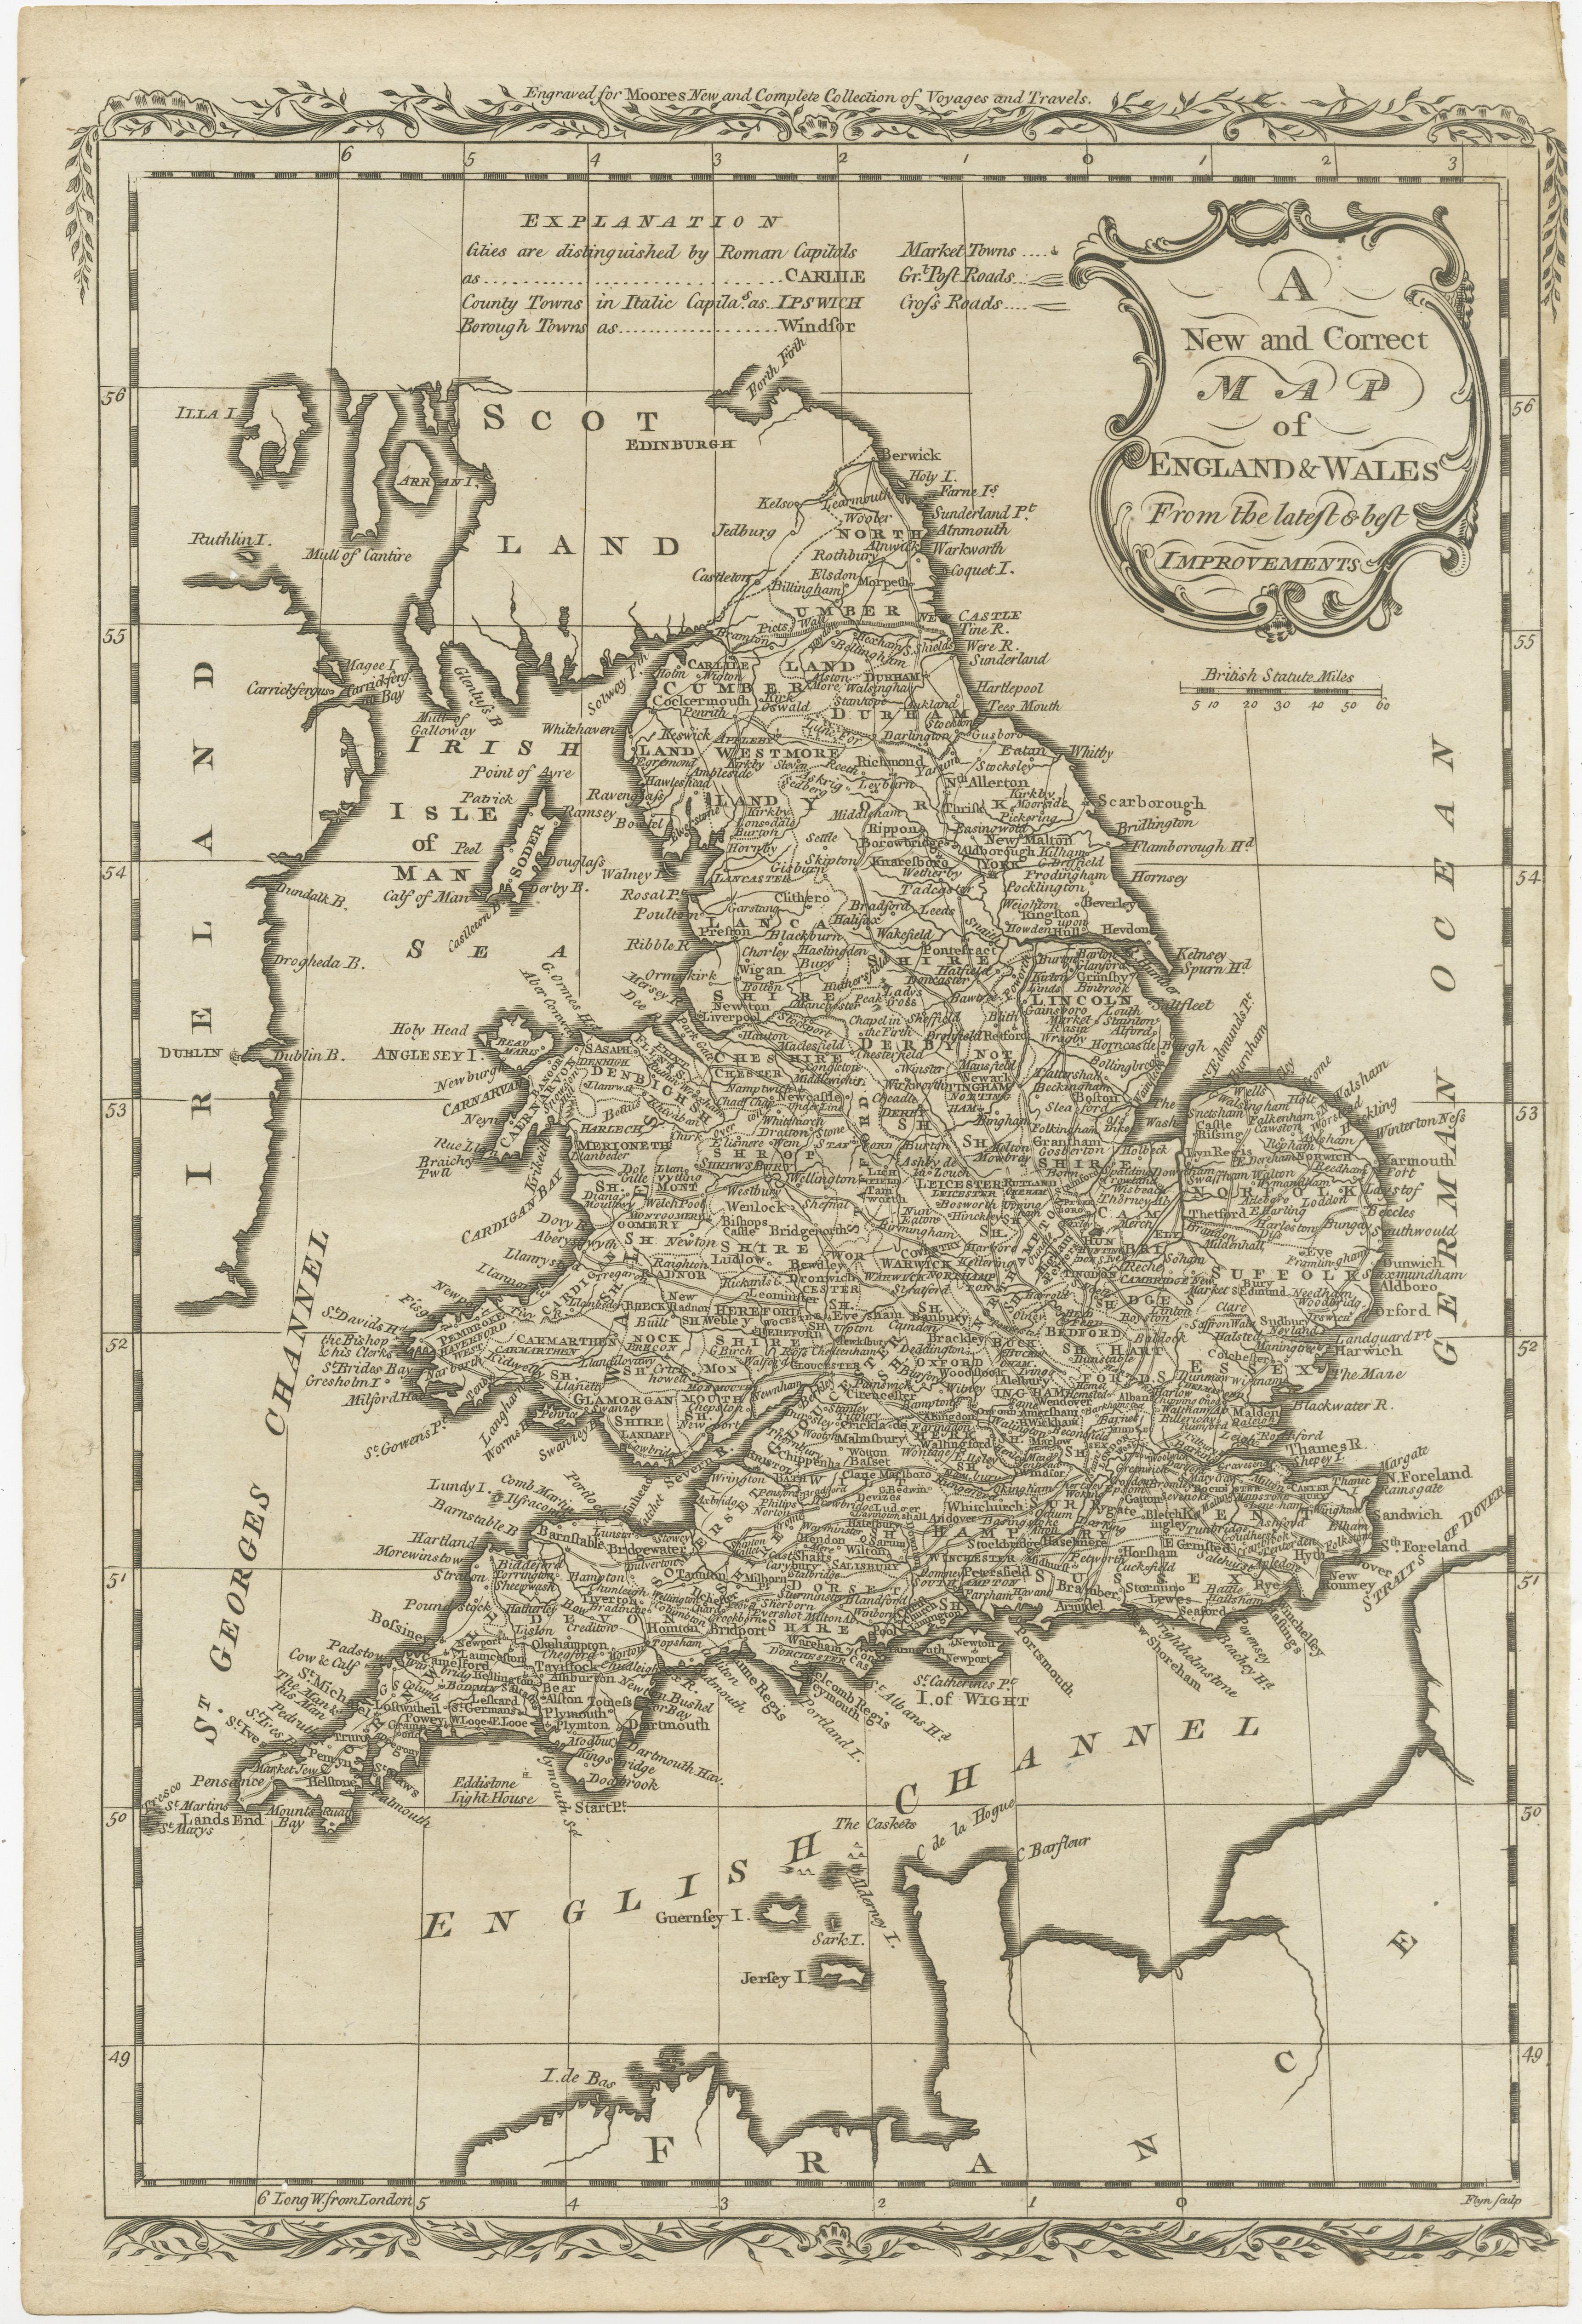 Antique map titled 'A New and Correct Map of England and Wales from the Latest and Best Improvements'. Original antique map of England and Wales. Printed by Alex Hogg, London for George Henry Millar's 'New, Complete and Universal System of